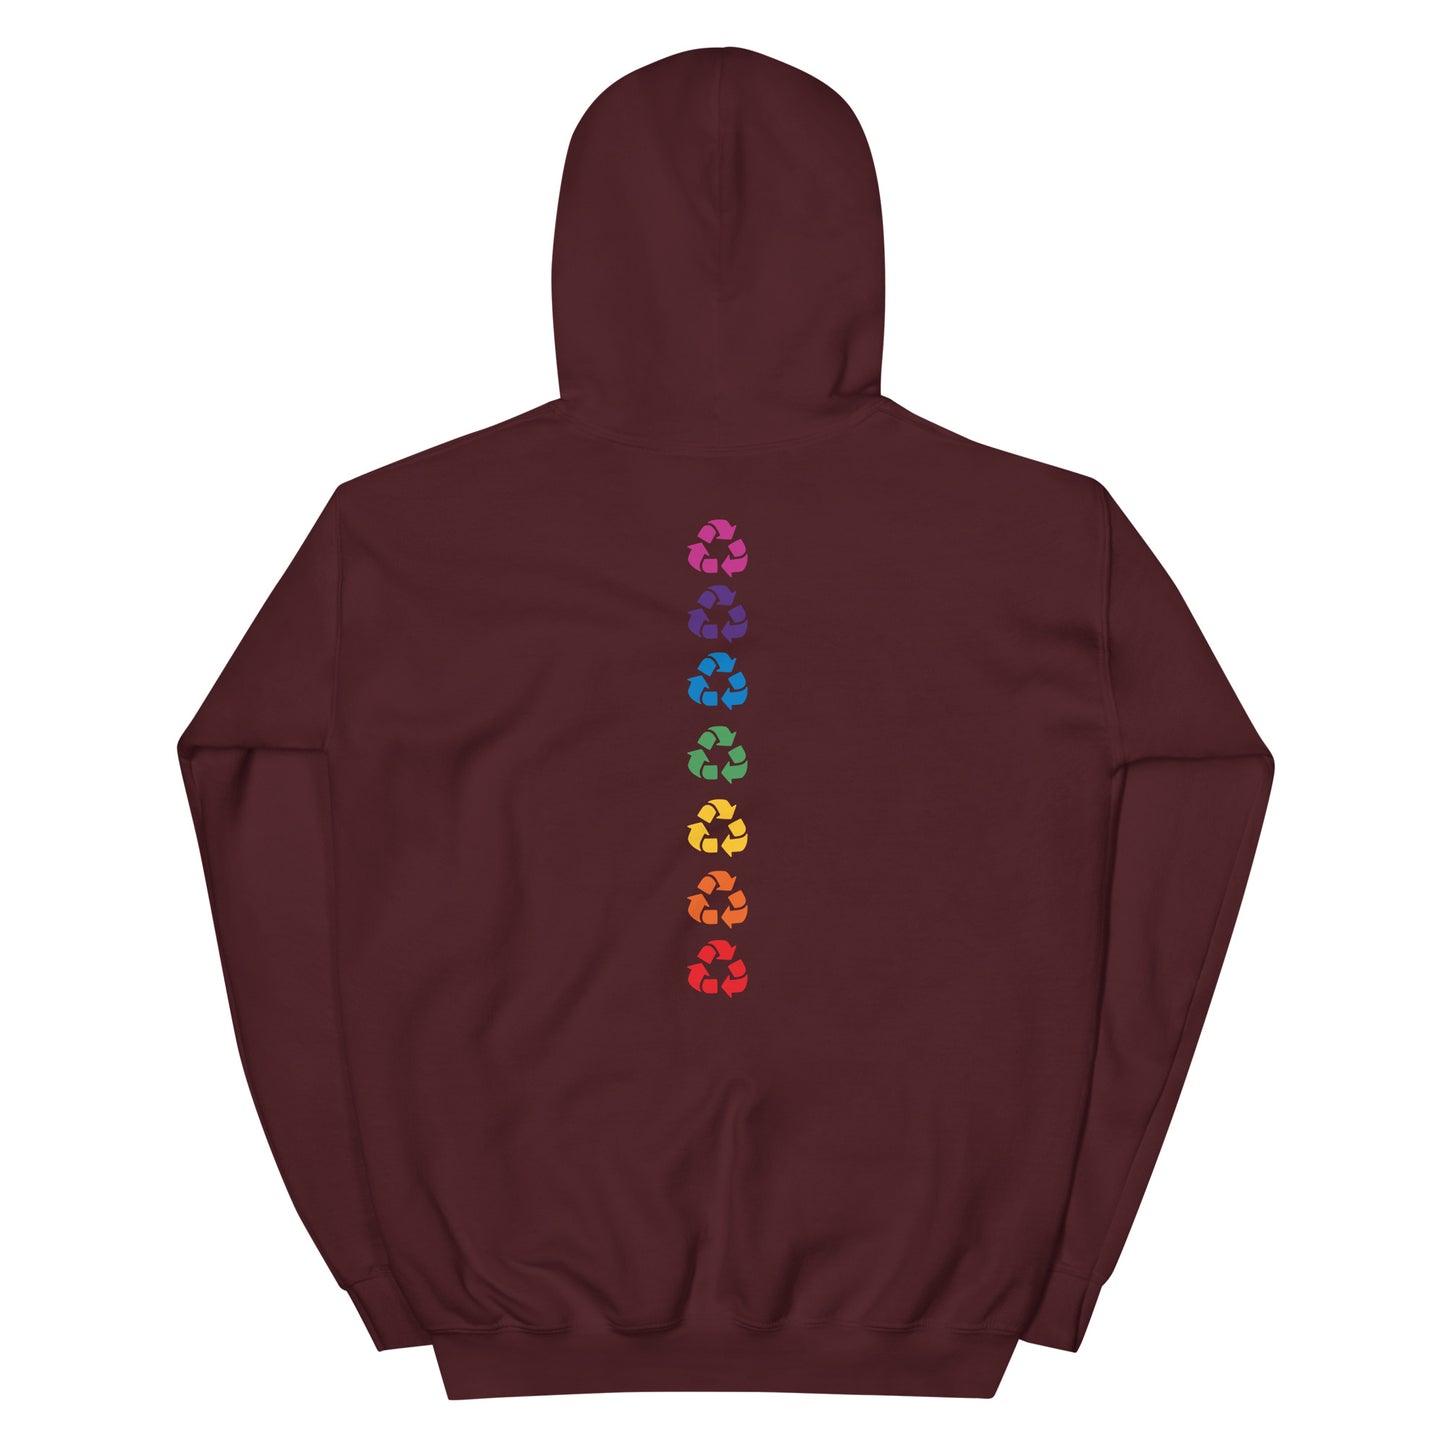 Unisex Peaceful Arches Hoodie